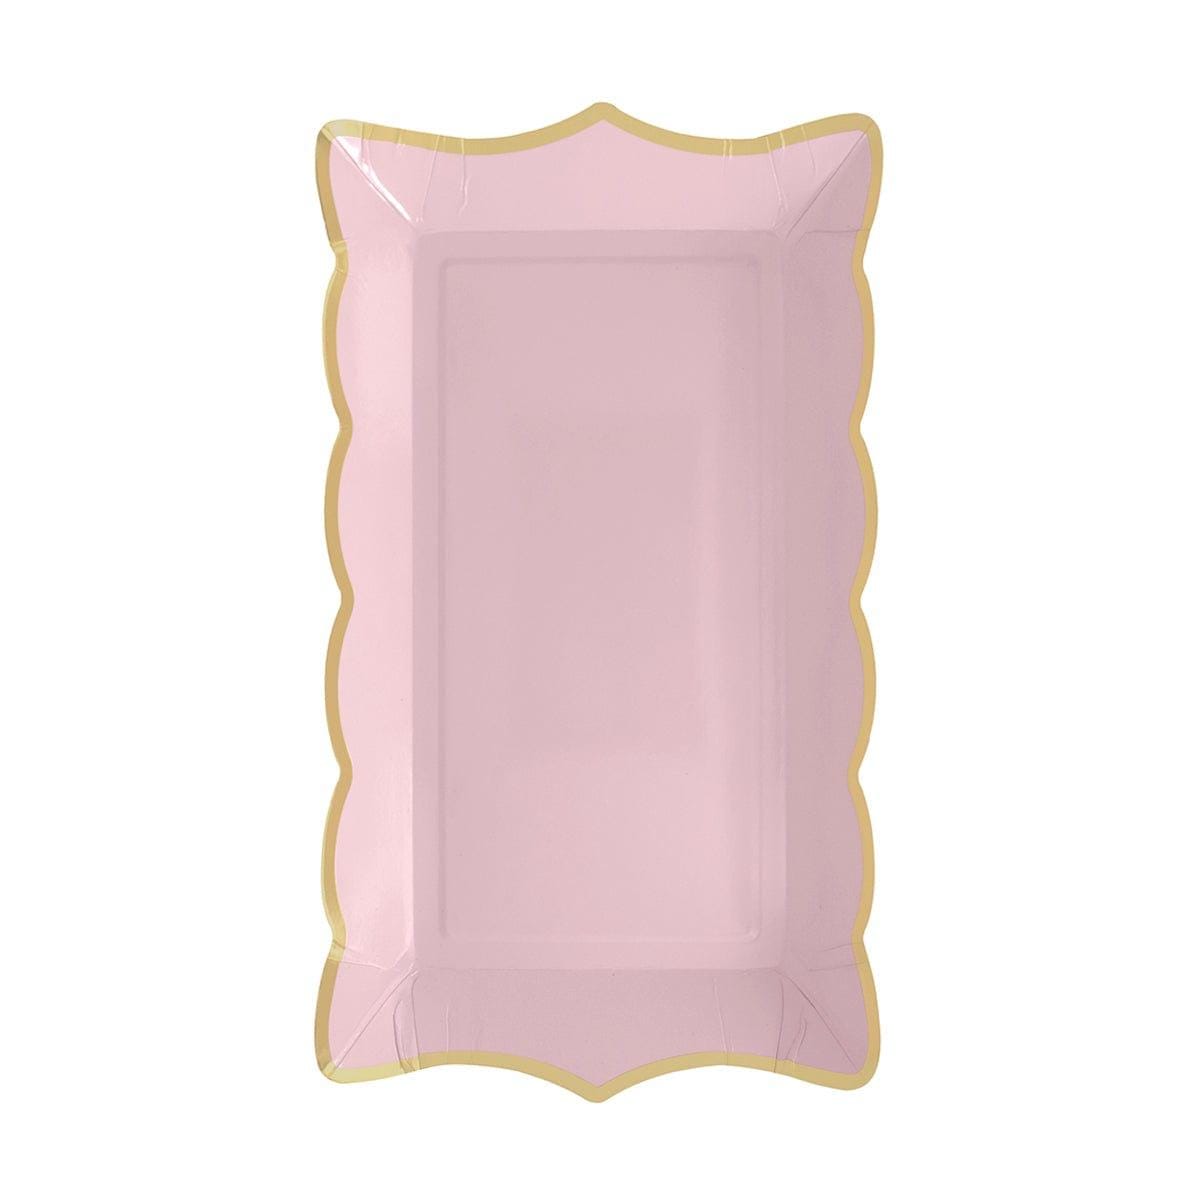 YIWU SANDY PAPER PRODUCTS CO., LTD Everyday Entertaining Light Pink Rectangular Trays, 9 Inches, 4 Count